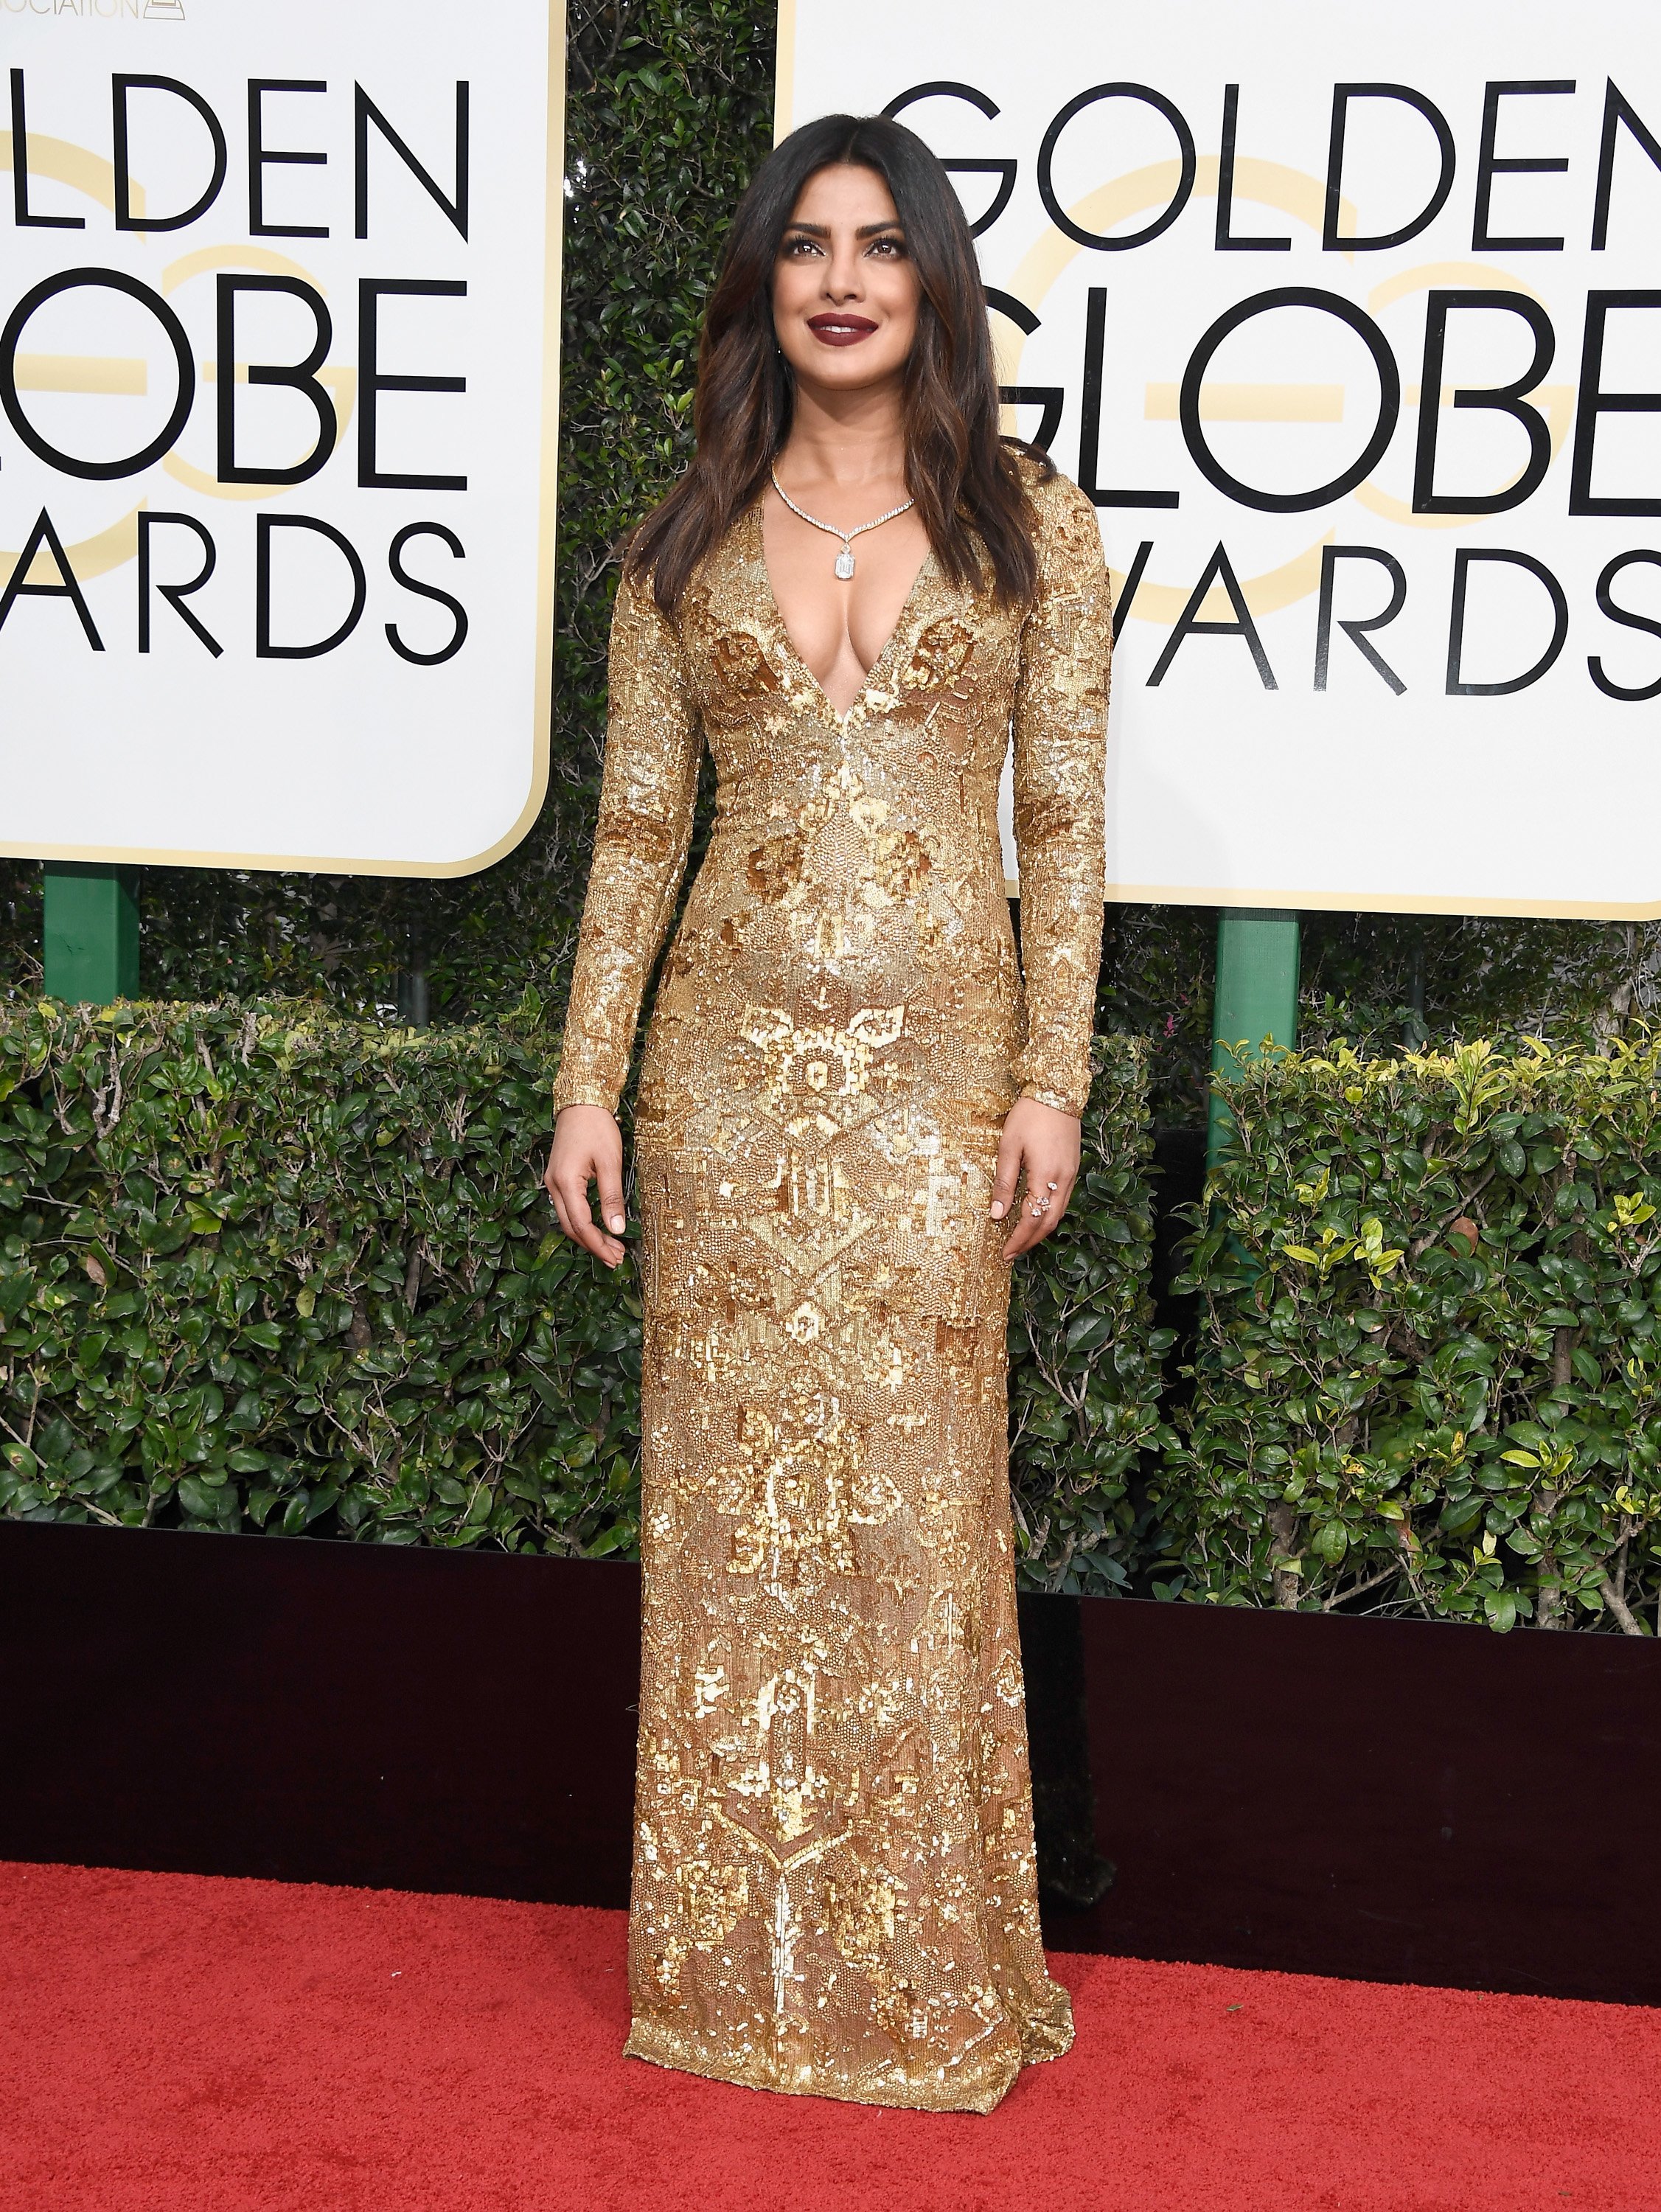 Priyanka Chopra attends the 74th Annual Golden Globe Awards at The Beverly Hilton Hotel on January 8, 2017 in Beverly Hills